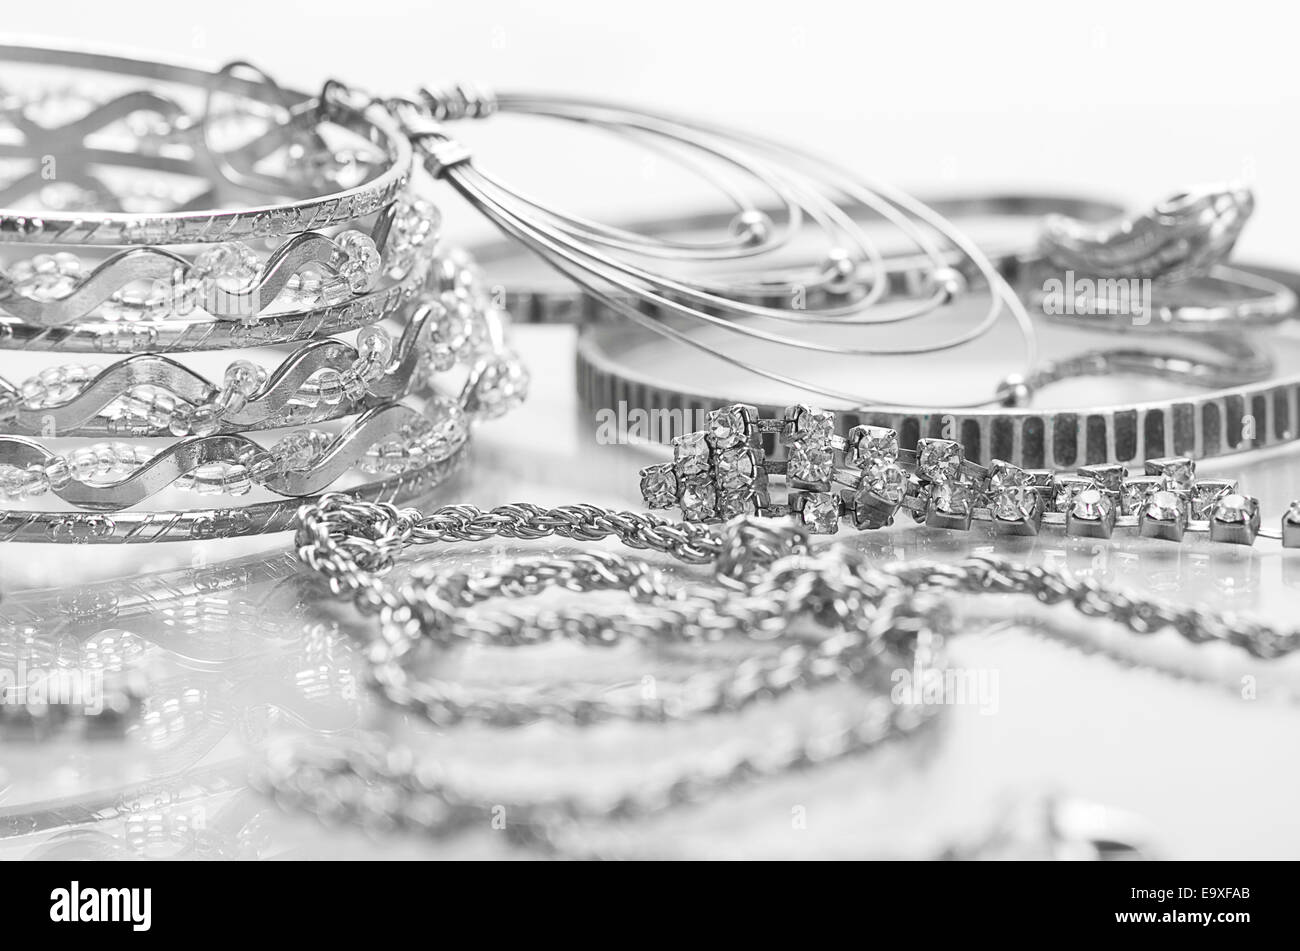 Different silver jewelry on the table. Stock Photo